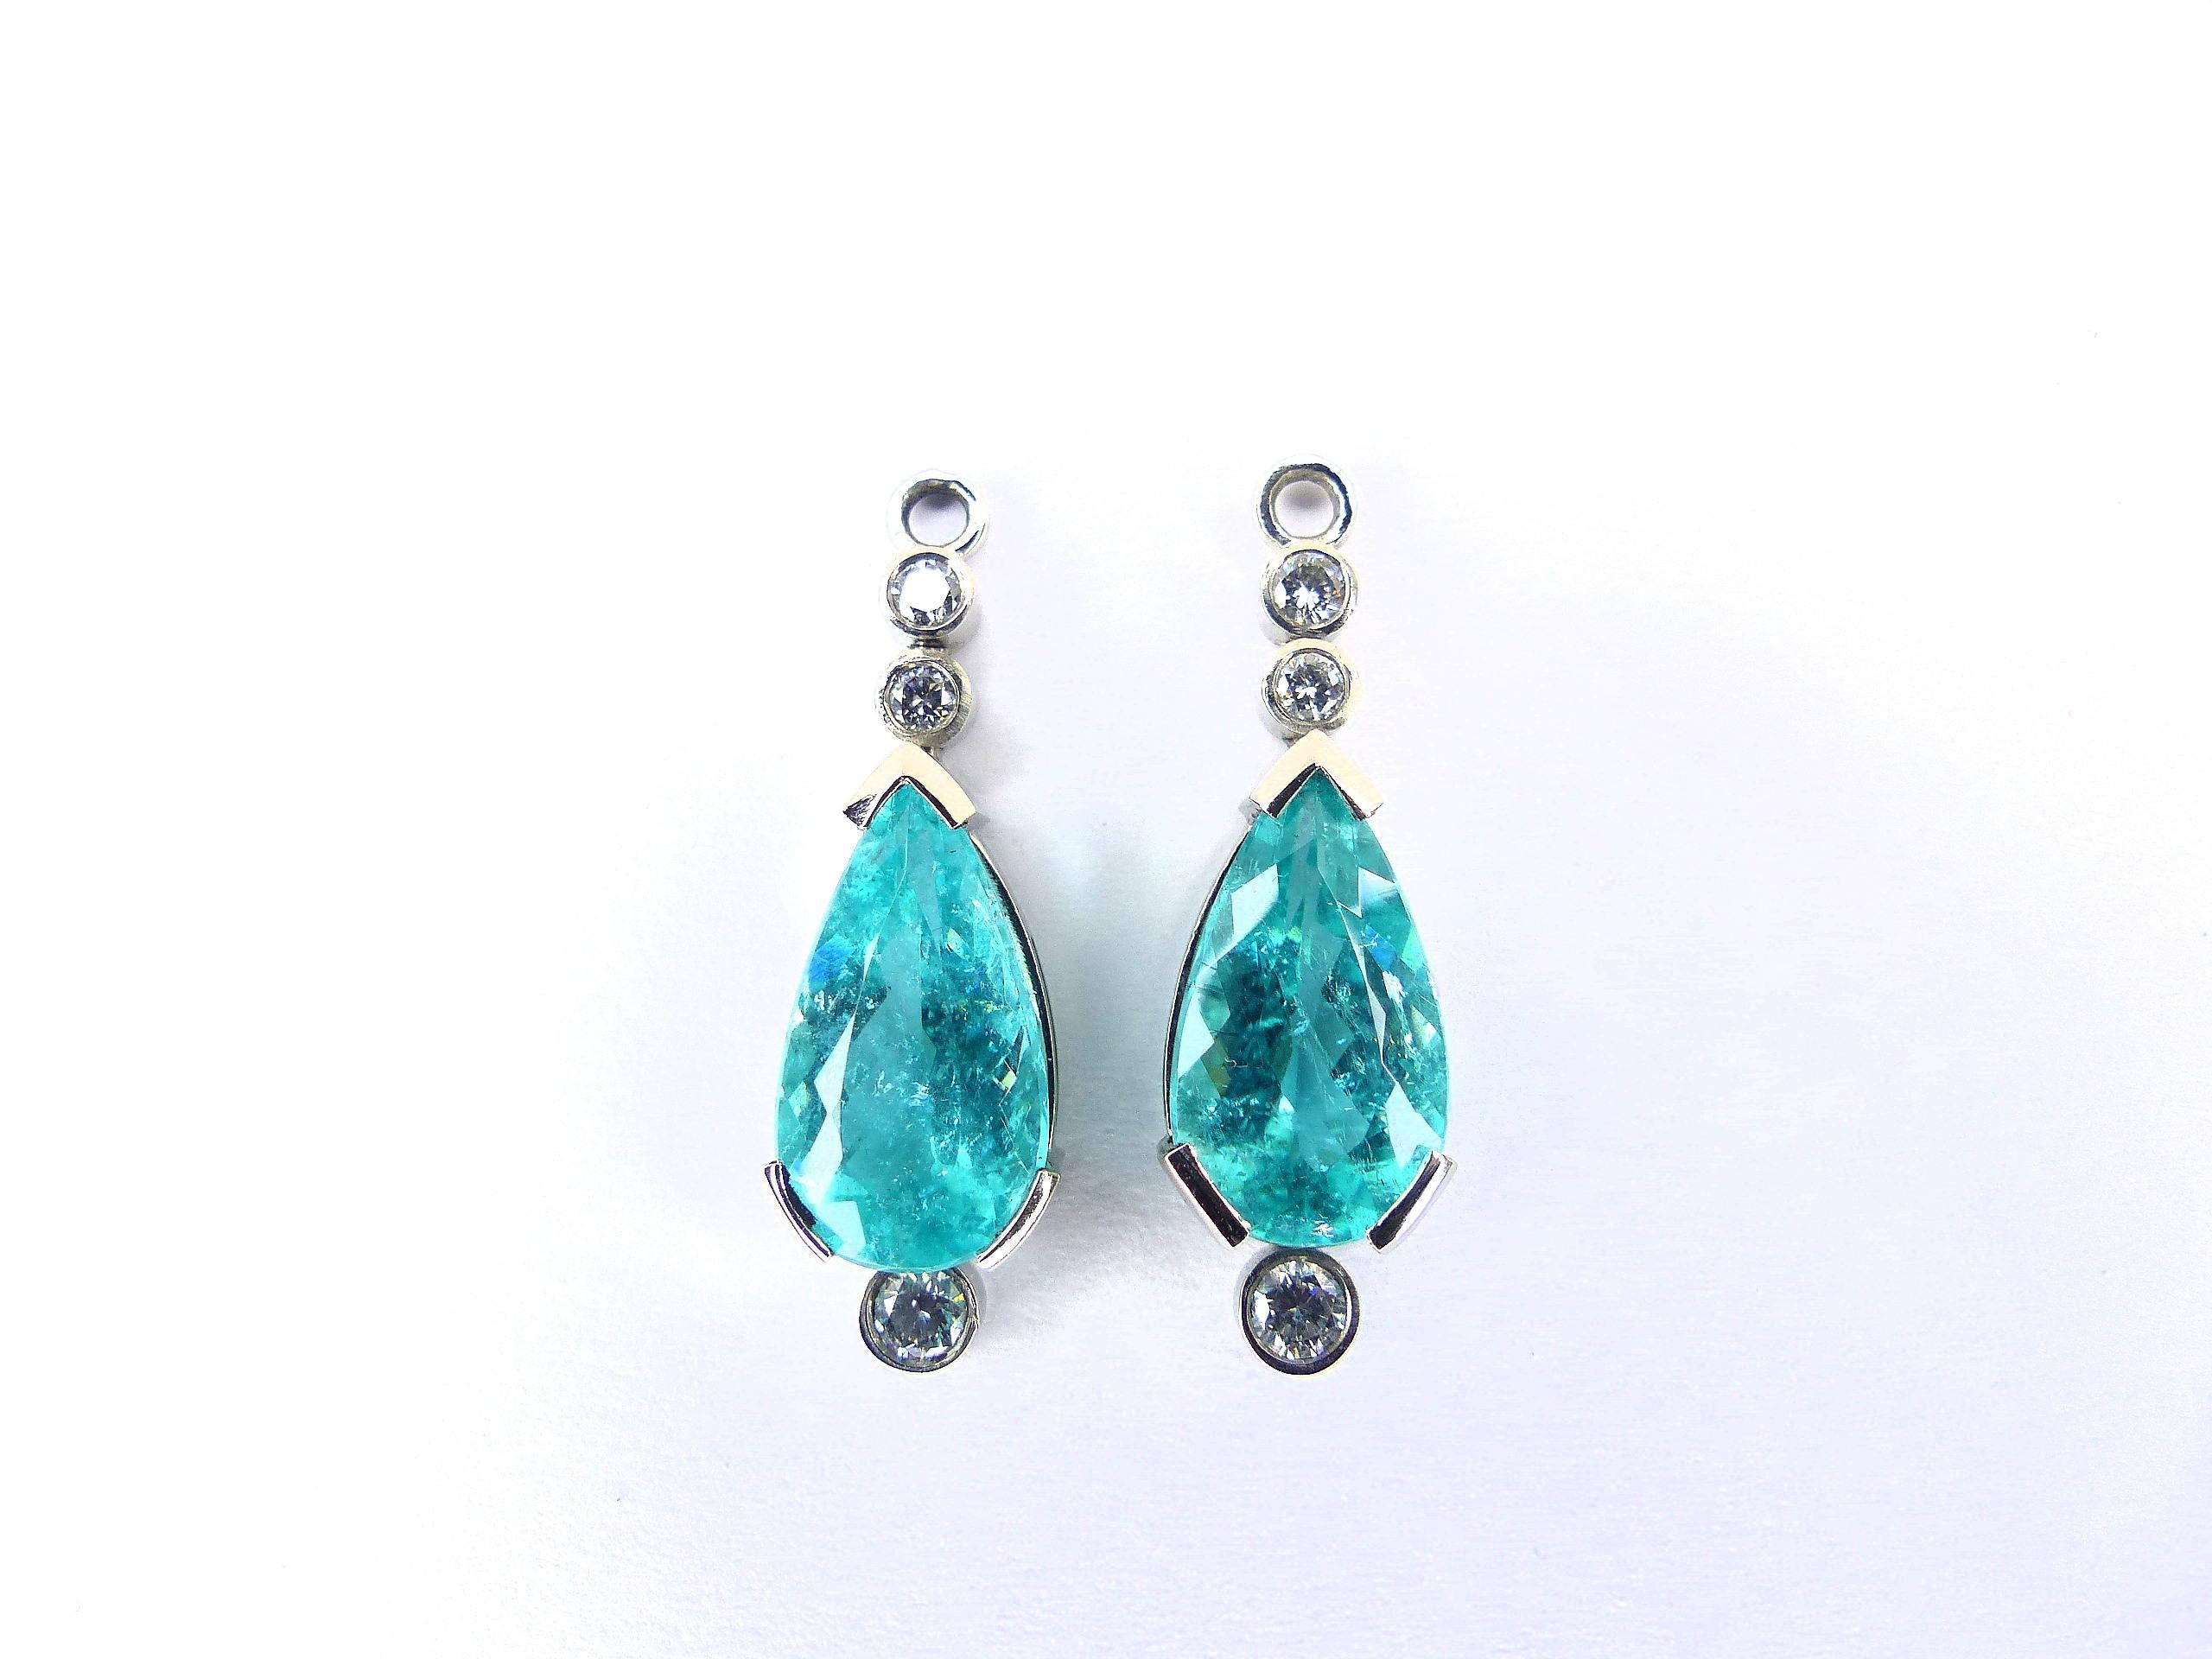 This pair of 950/ Platinum (7.50g) Drop Earrings are set with 2x fine blue/green Paraiba Tourmalines (facetted, pear-shape, 15x8mm, 7.93cts) + 6x Diamonds (Brilliant-cut, D/VS, round, 2.5-3mm, 0.36cts).

Paraiba Tourmalines are very popular and rare